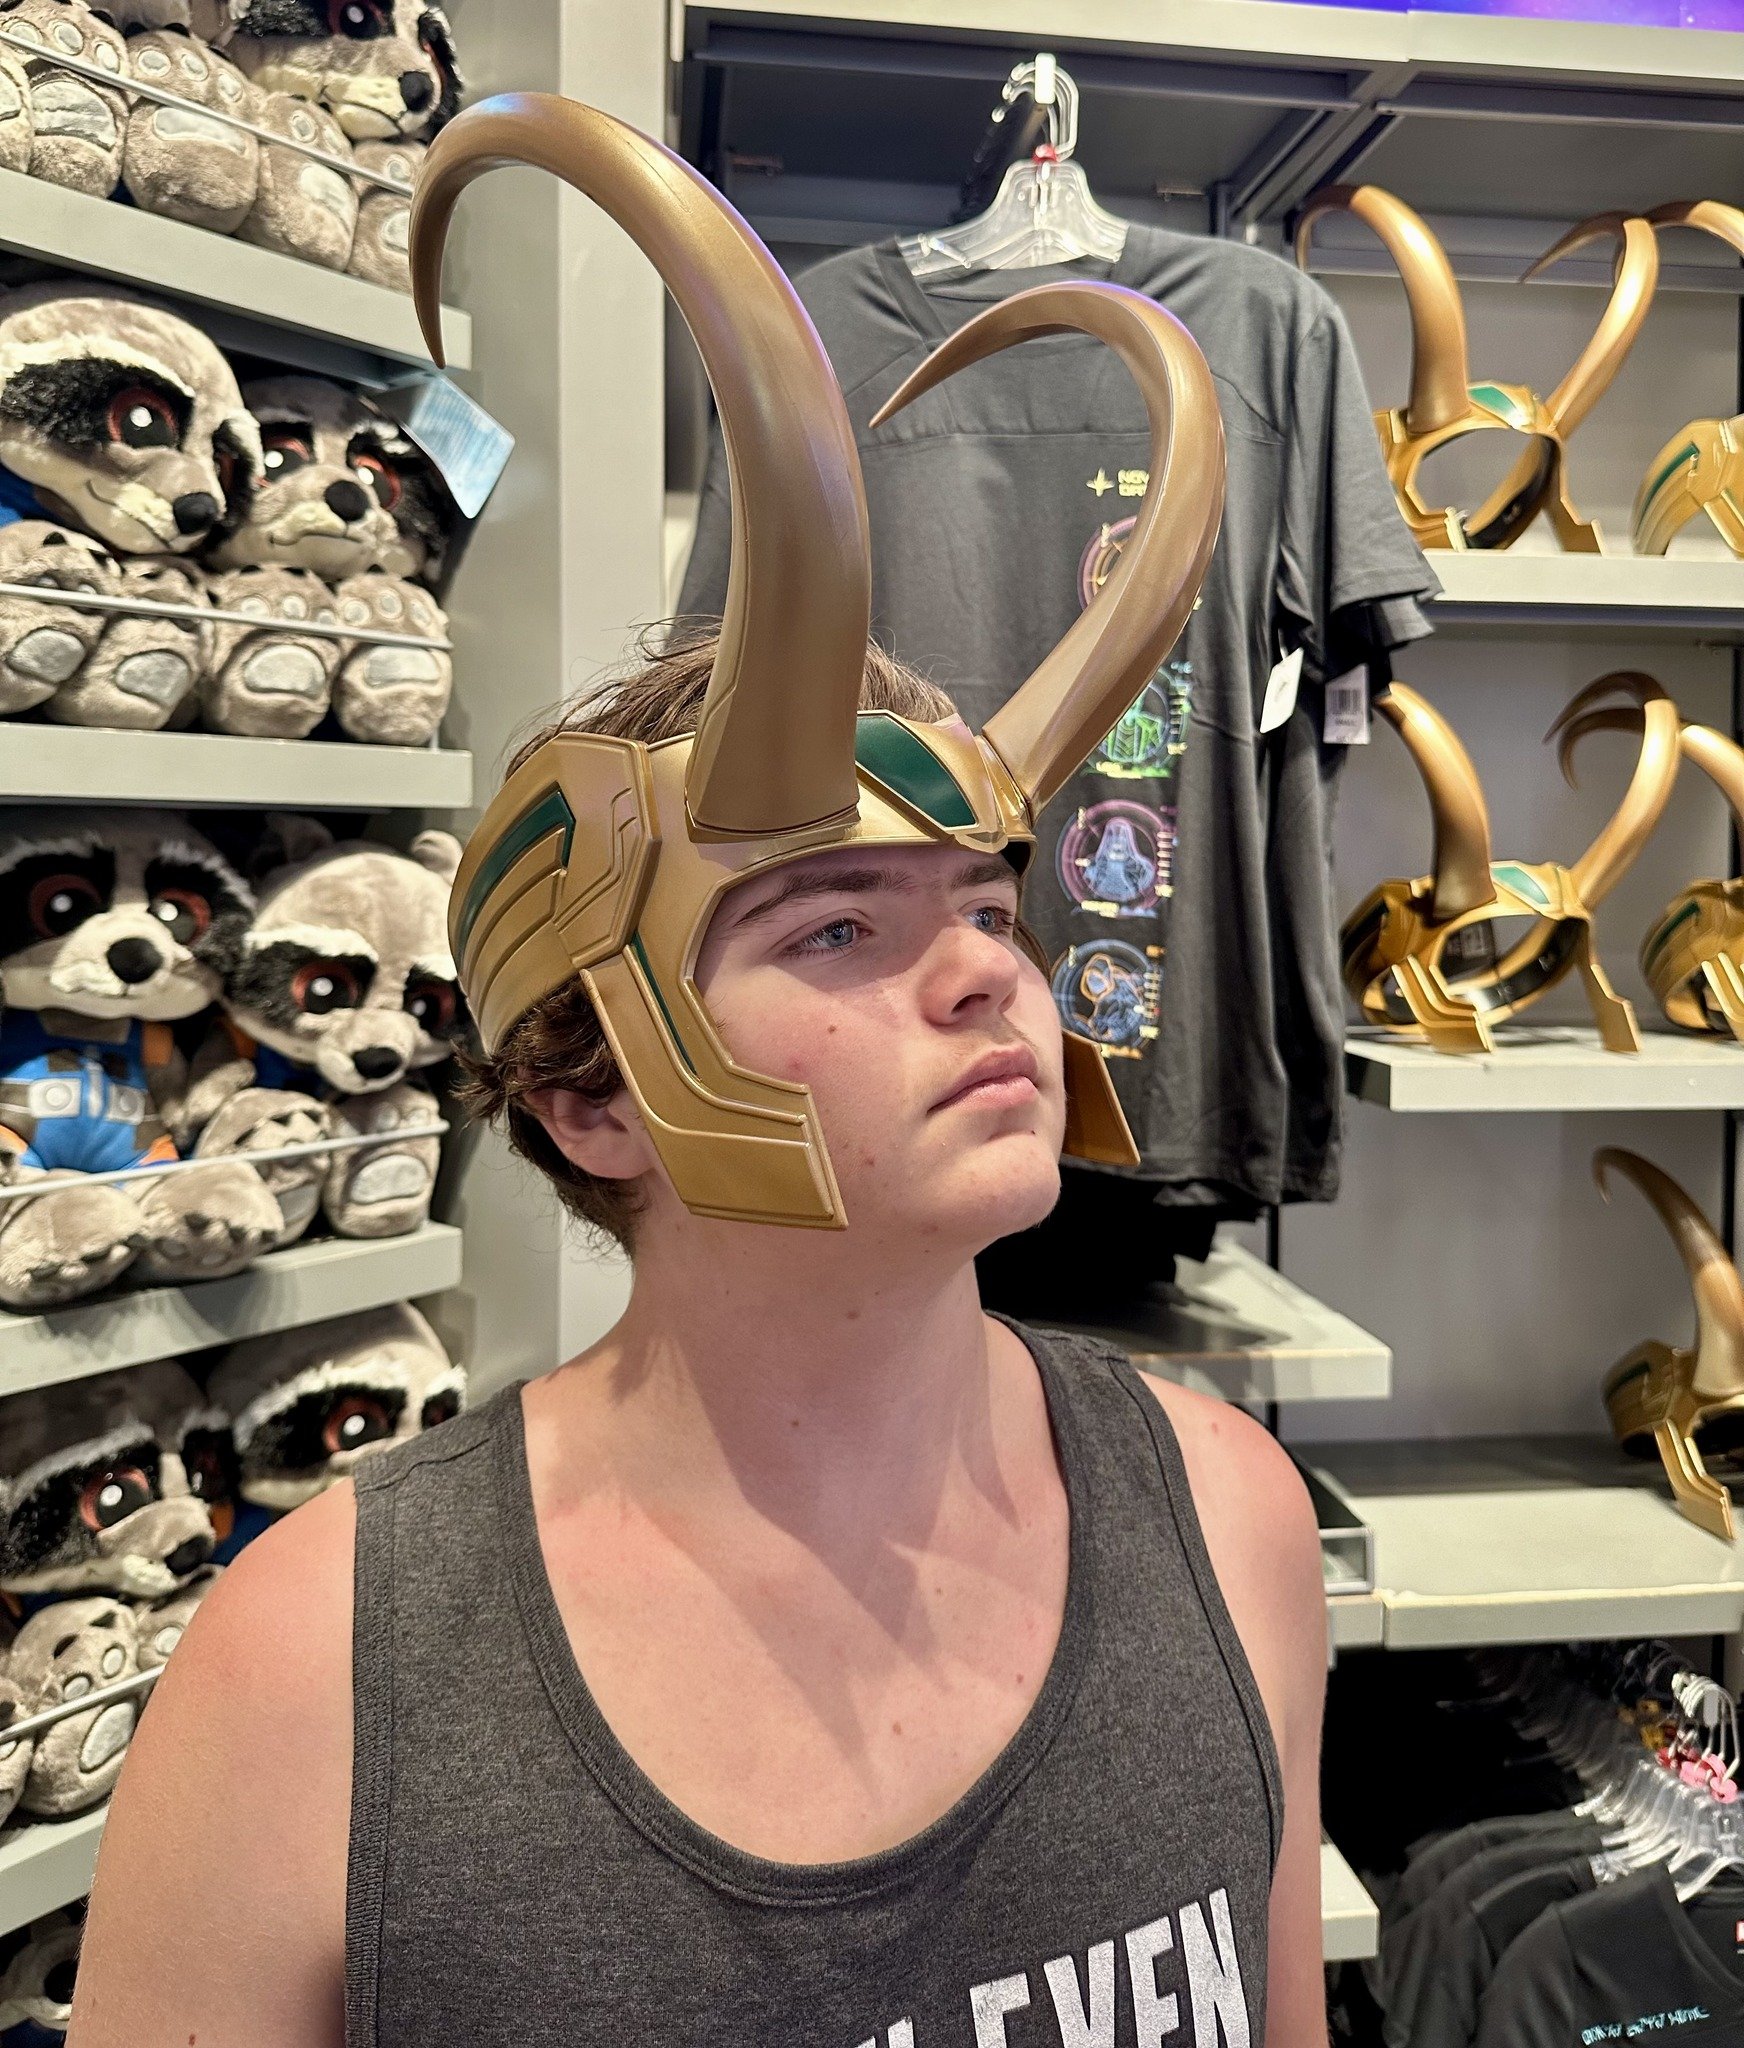 The best theme park souvenir shop for Marvel fans is - without a doubt, the gift shop at the end of Guardians of the Galaxy: Cosmic Rewind at EPCOT. They have so many fun props, clothing, accessories, and you can pick up all the infinity stones your 